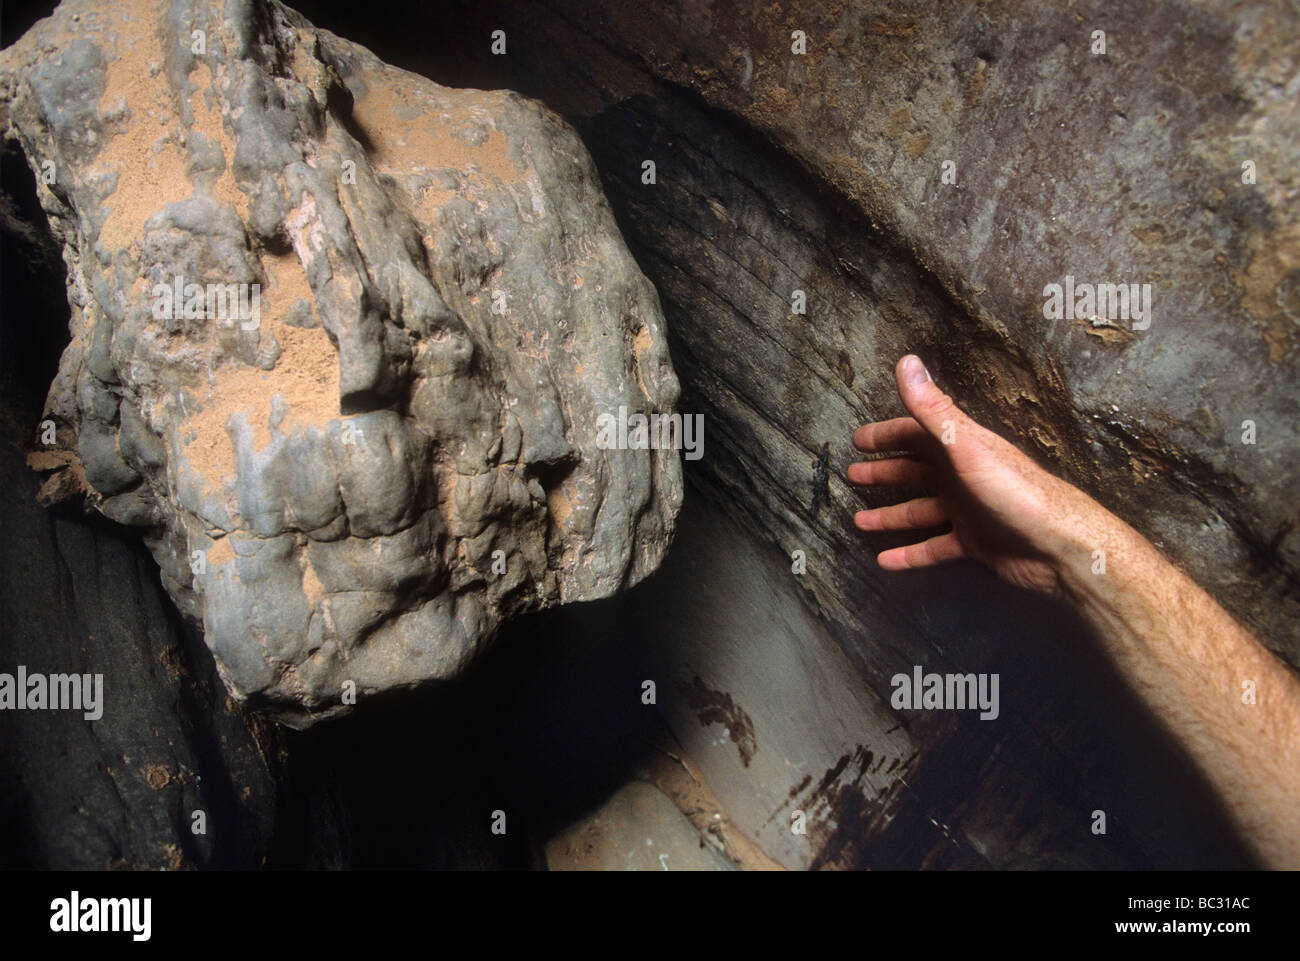 A hand indicates the approximate position where Aron Ralston's hand was trapped by a chockstone (to the left of the hand), and R Stock Photo